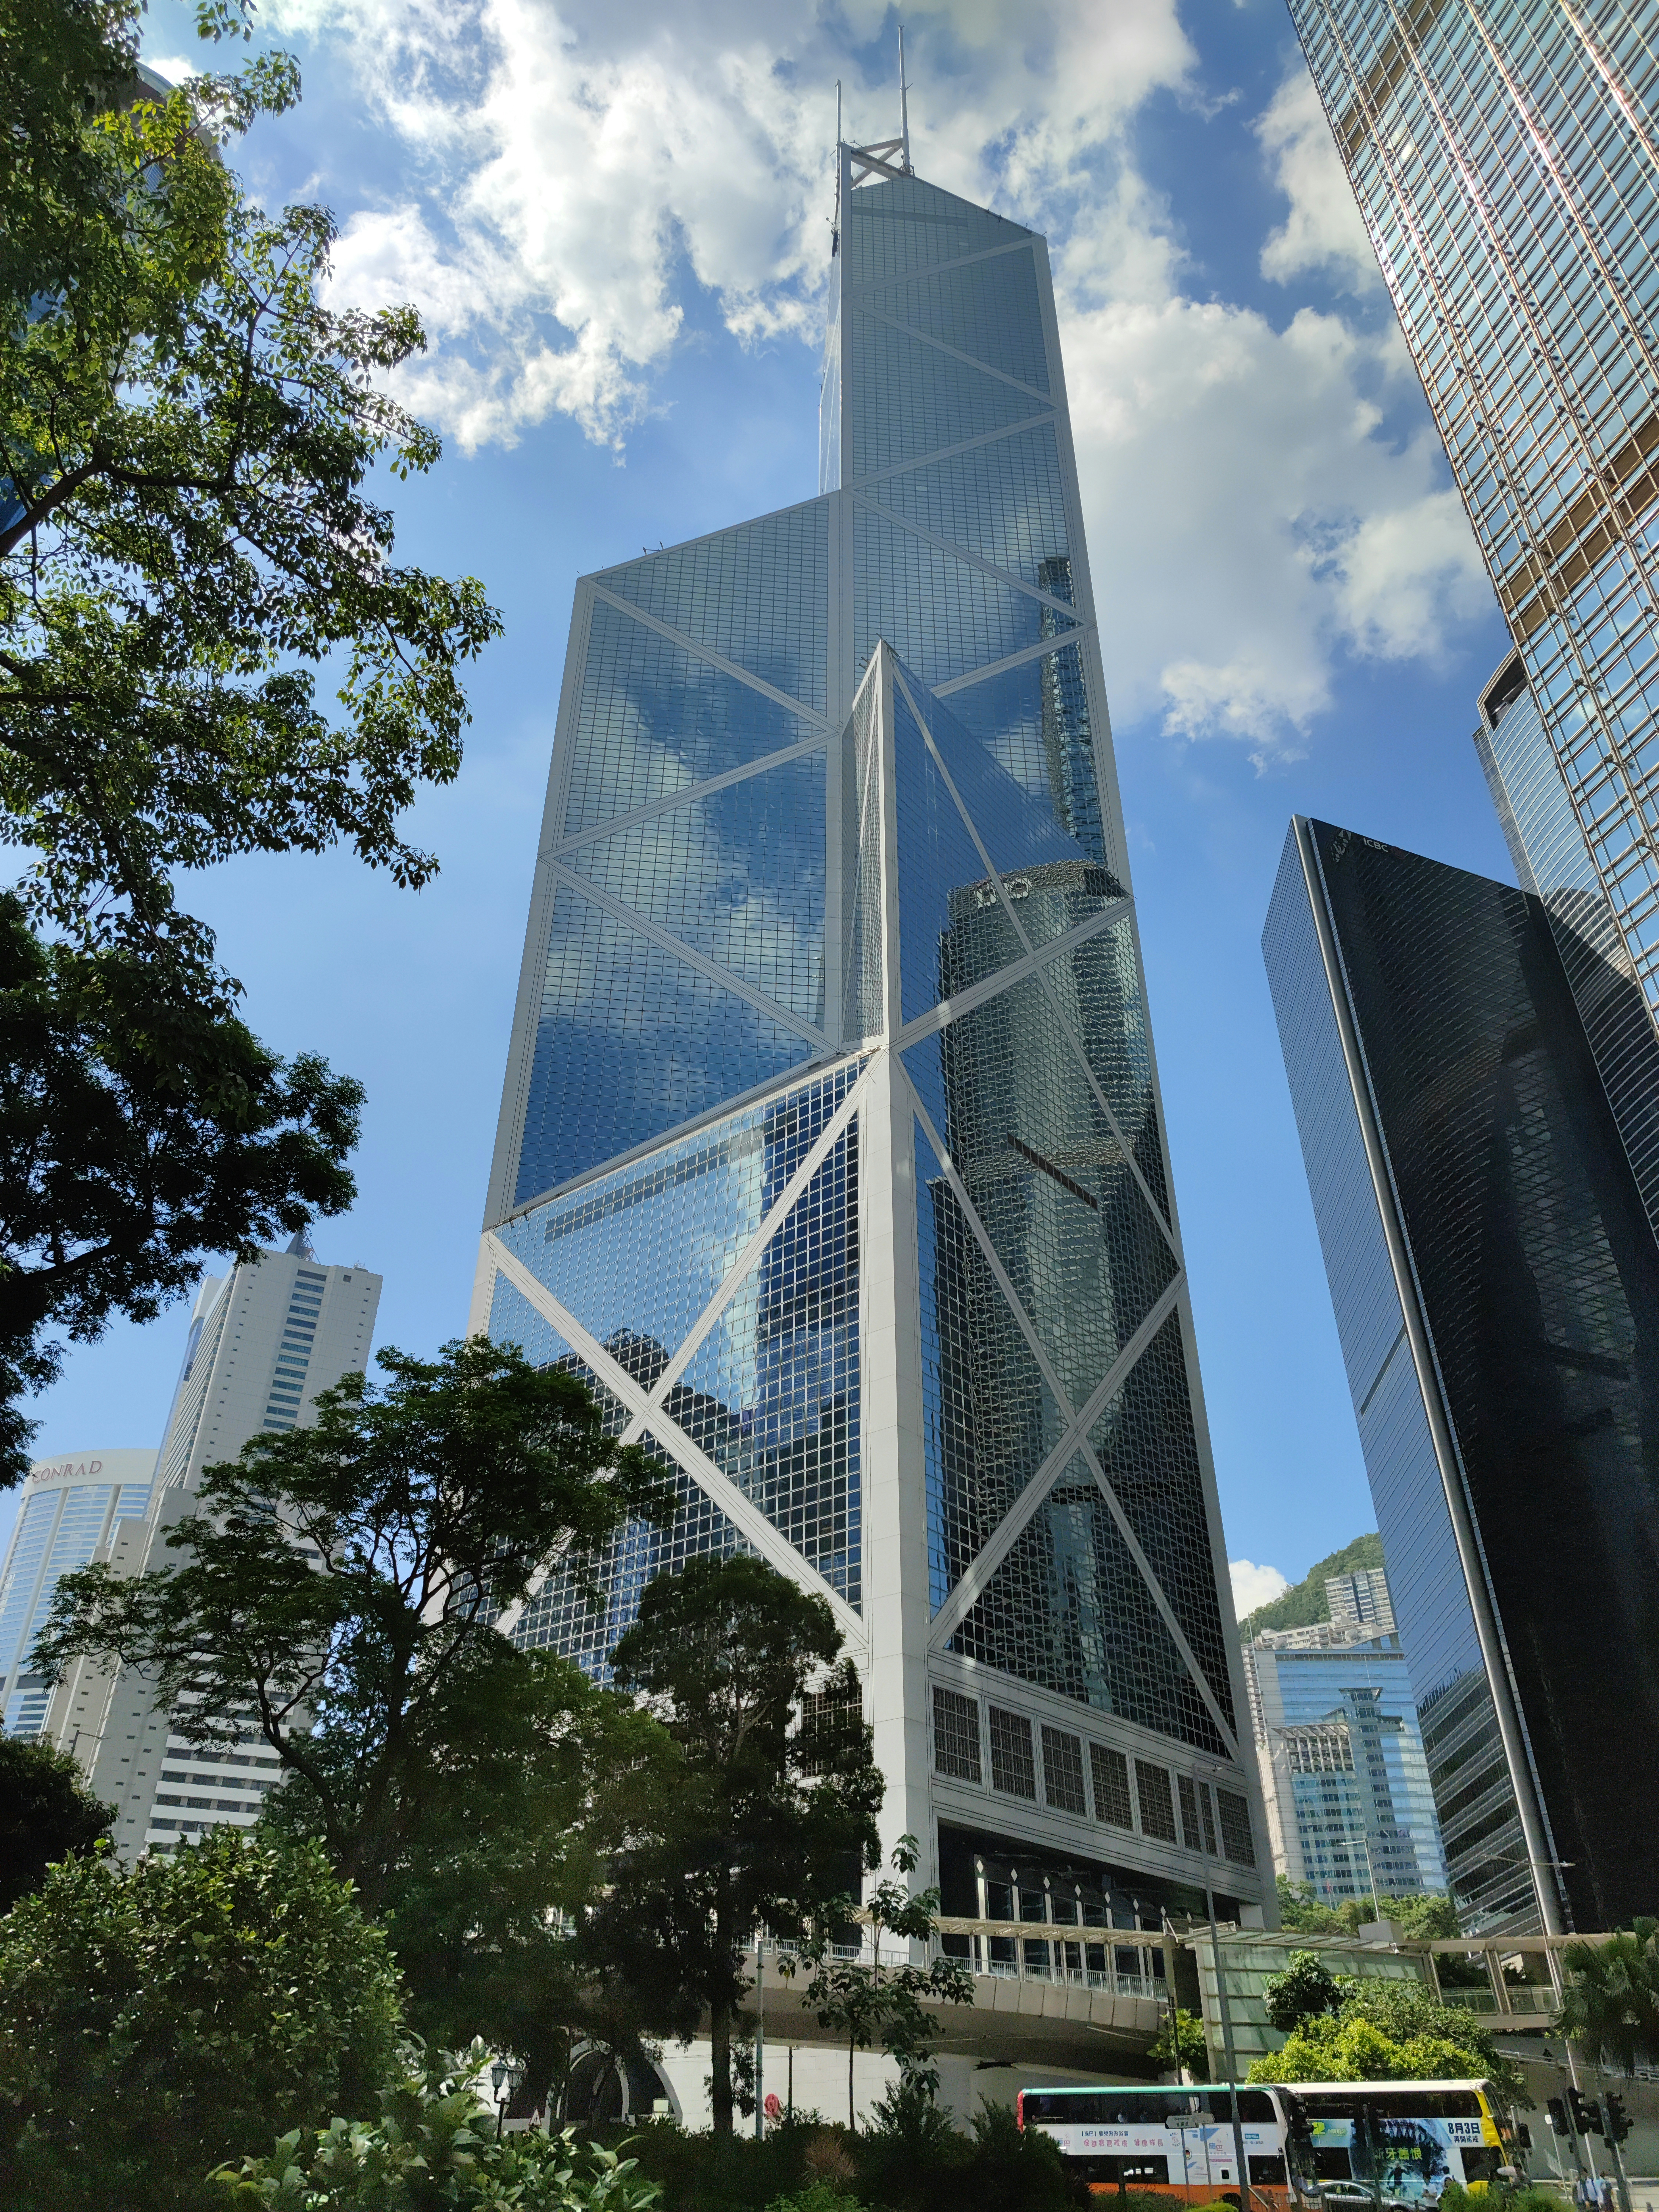 The iconic Bank of China Tower in Central District, Hong Kong, designed by the renowned Chinese architect Ieoh Ming Pei (貝聿銘). The design of this building resembles the structure of a bamboo tree, which denotes rising up or growing up. Pei was also the architect who built The Louvre Pyramid (i.e. entrance) of the Louvre Museum in Paris. The photo was taken in Chater Garden.